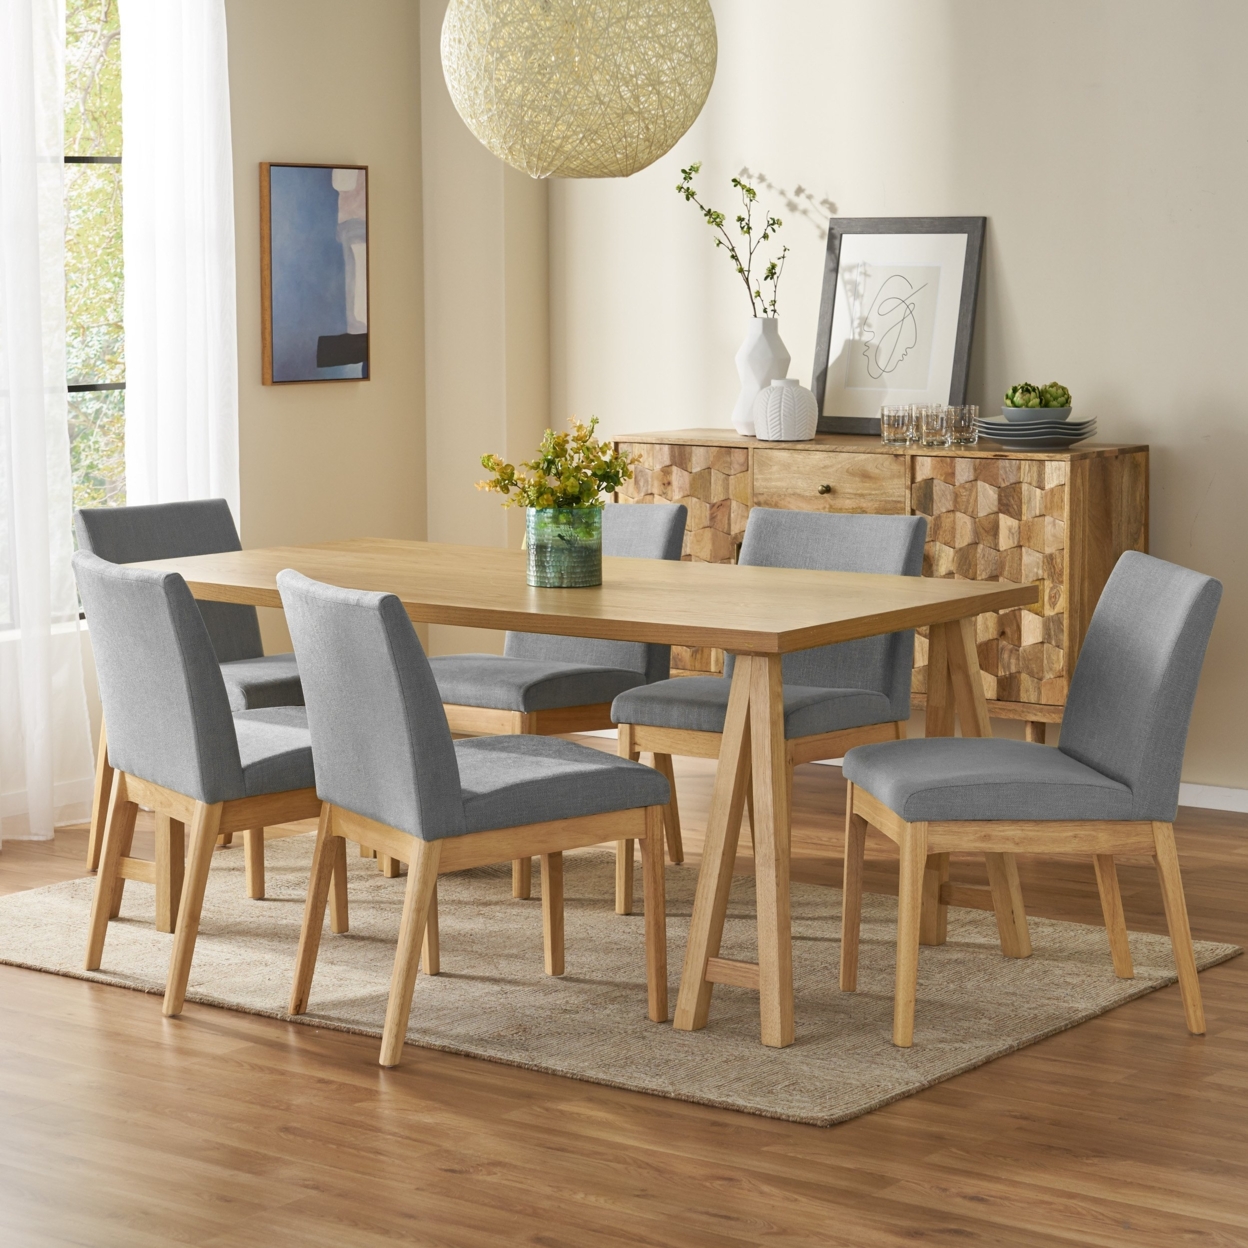 Elsinore Mid-Century Modern 7 Piece Dining Set With A-Frame Table - Dark Gray/natural Oak/dark Grey